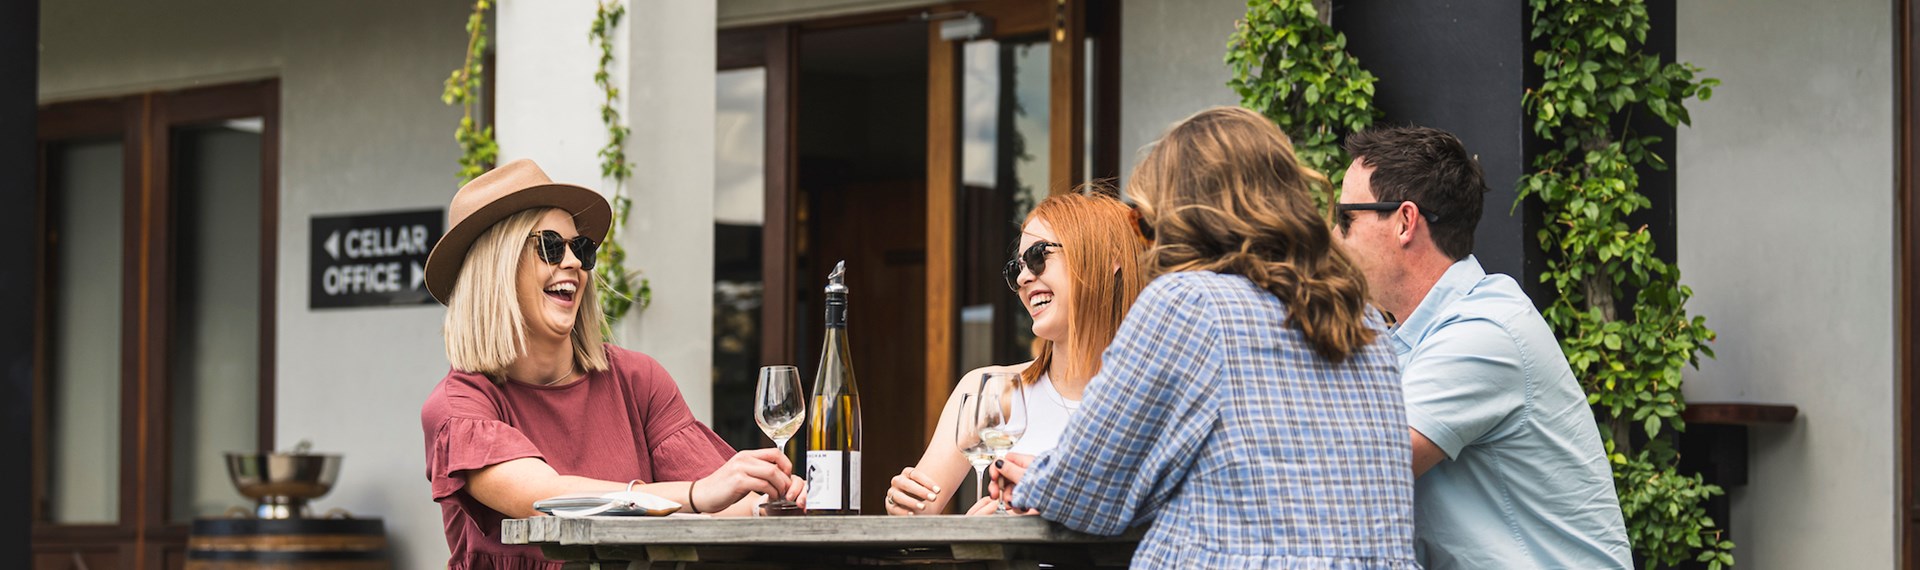 Four people sitting outdoors at a winery cellar door drinking wine on a wine tour Marlborough near Blenheim, at the top of New Zealand's South Island